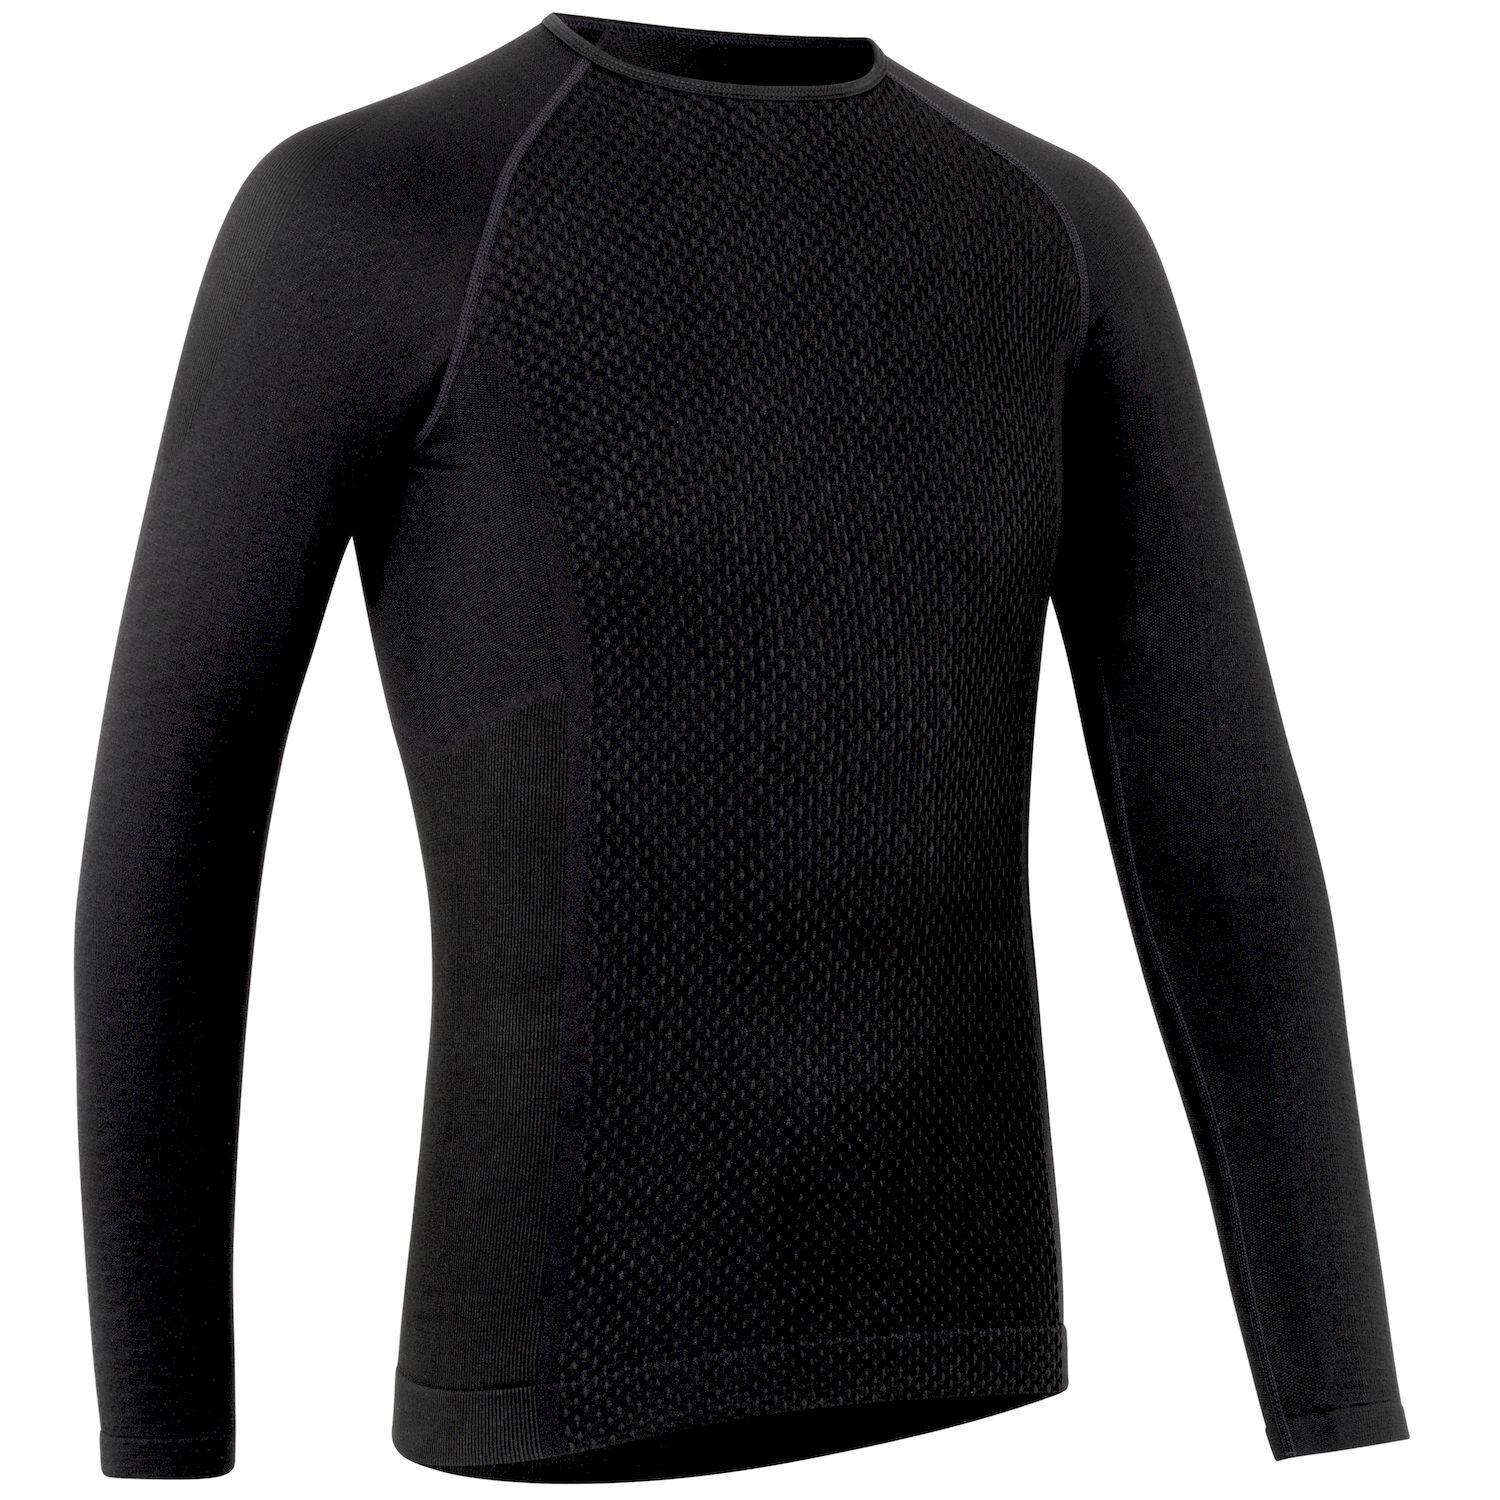 GripGrab Expert Seamless Long Sleeve Thermal Base Layer 2 - Underställ